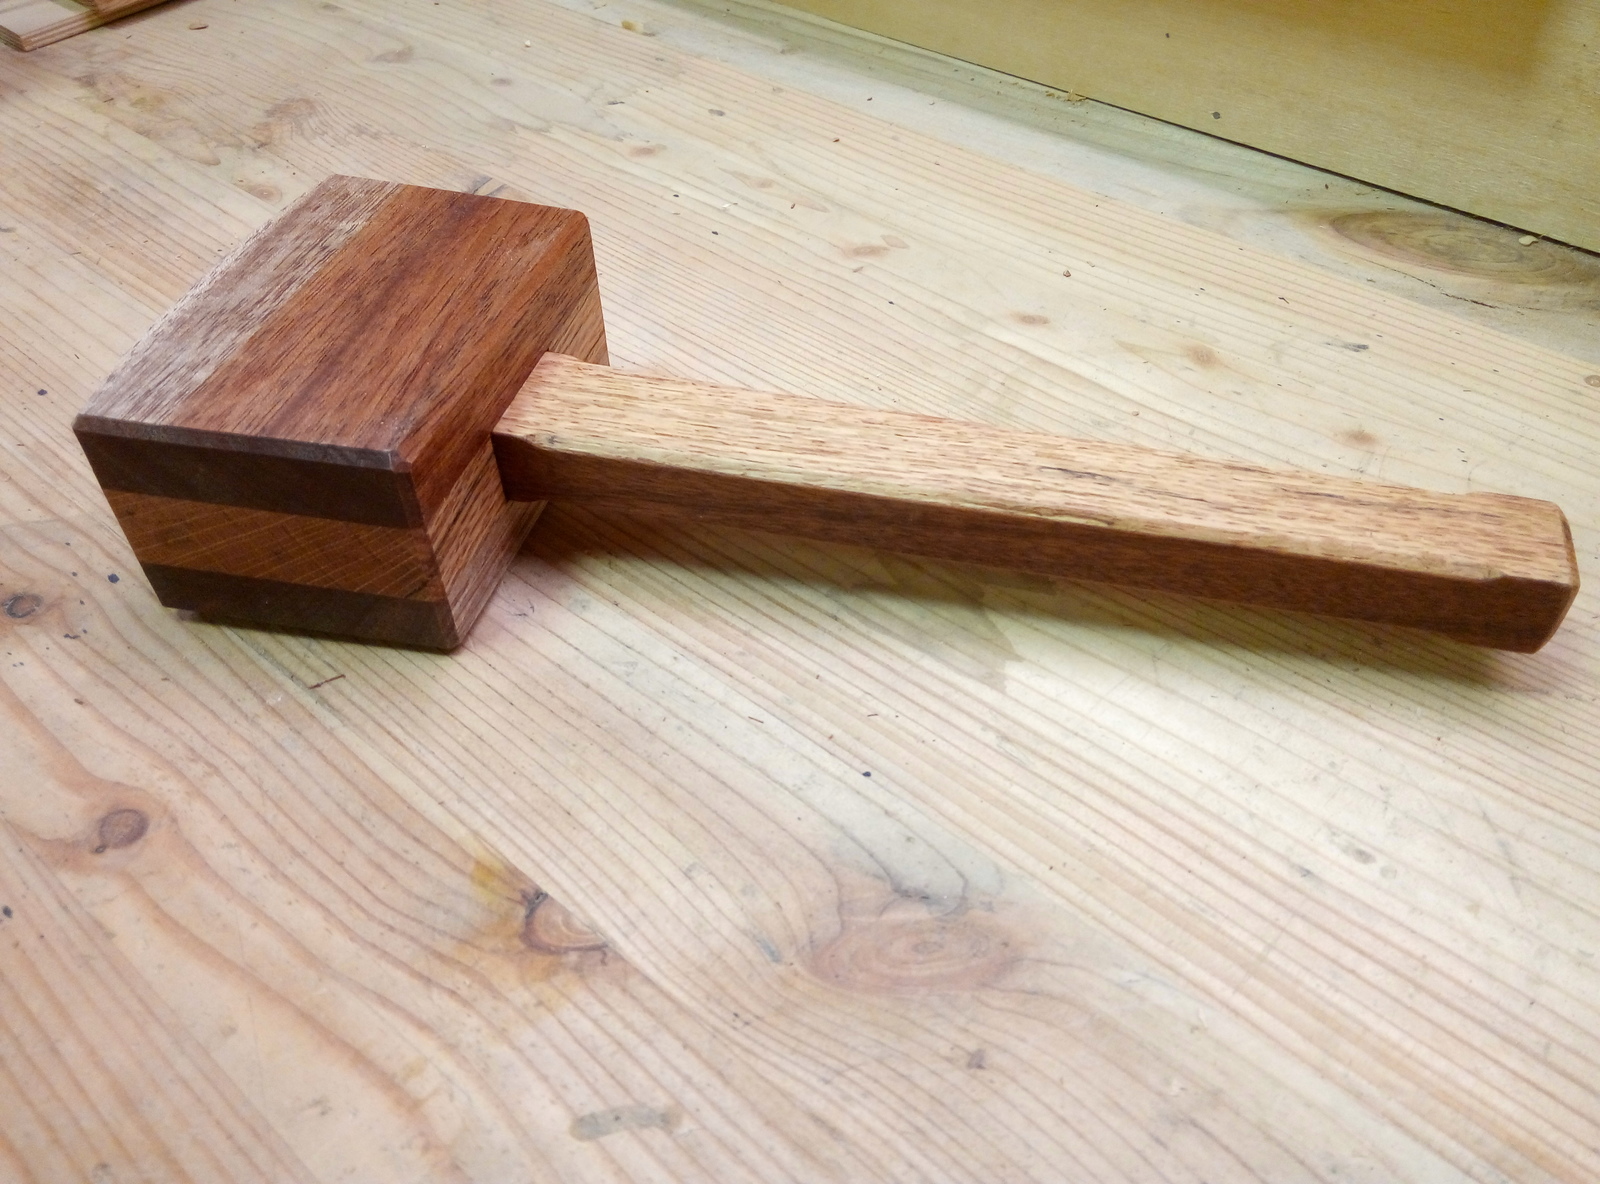 Do-it-yourself mallet - My, Carpenter, With your own hands, Workshop, Woodworking, Mallet, Tree, Woodworking, Sapele, Longpost